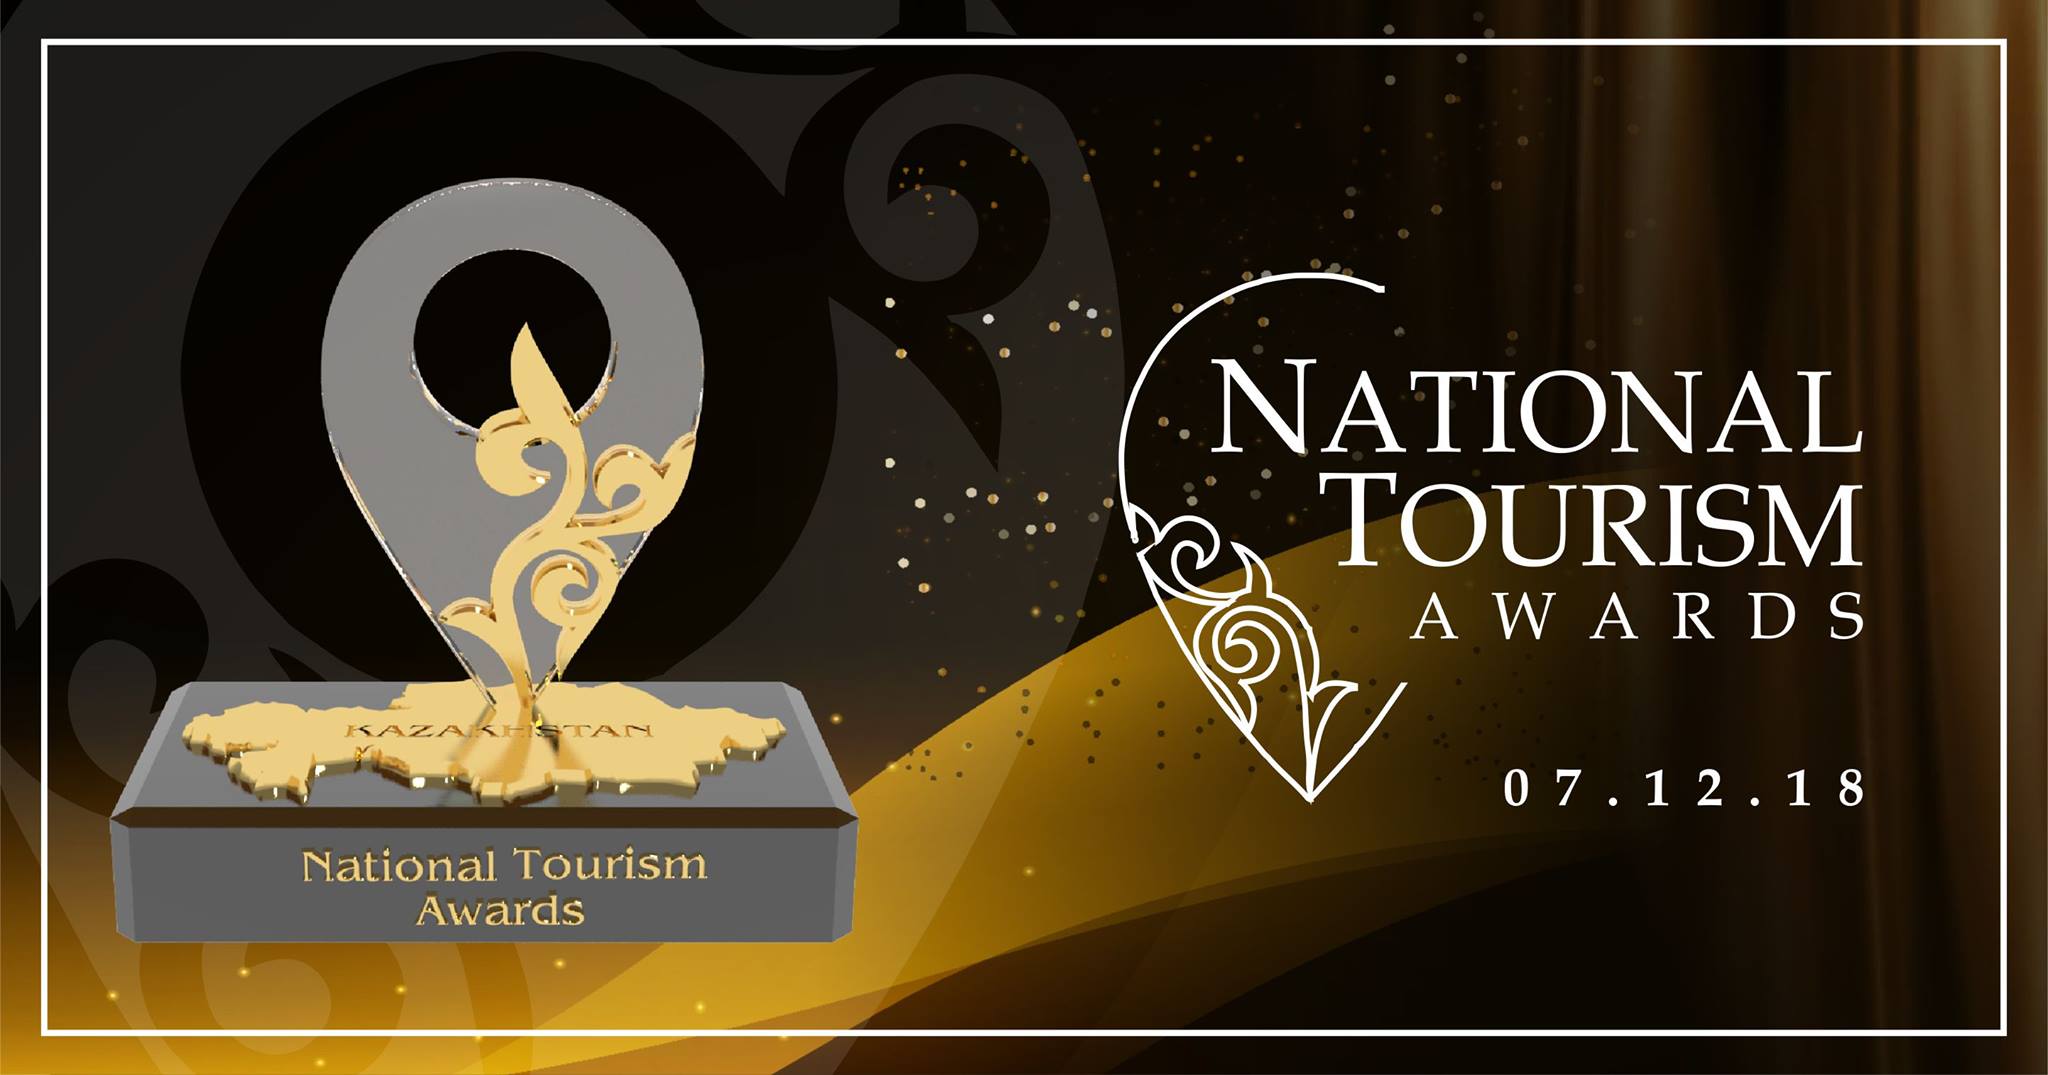 National Award in the field of tourism